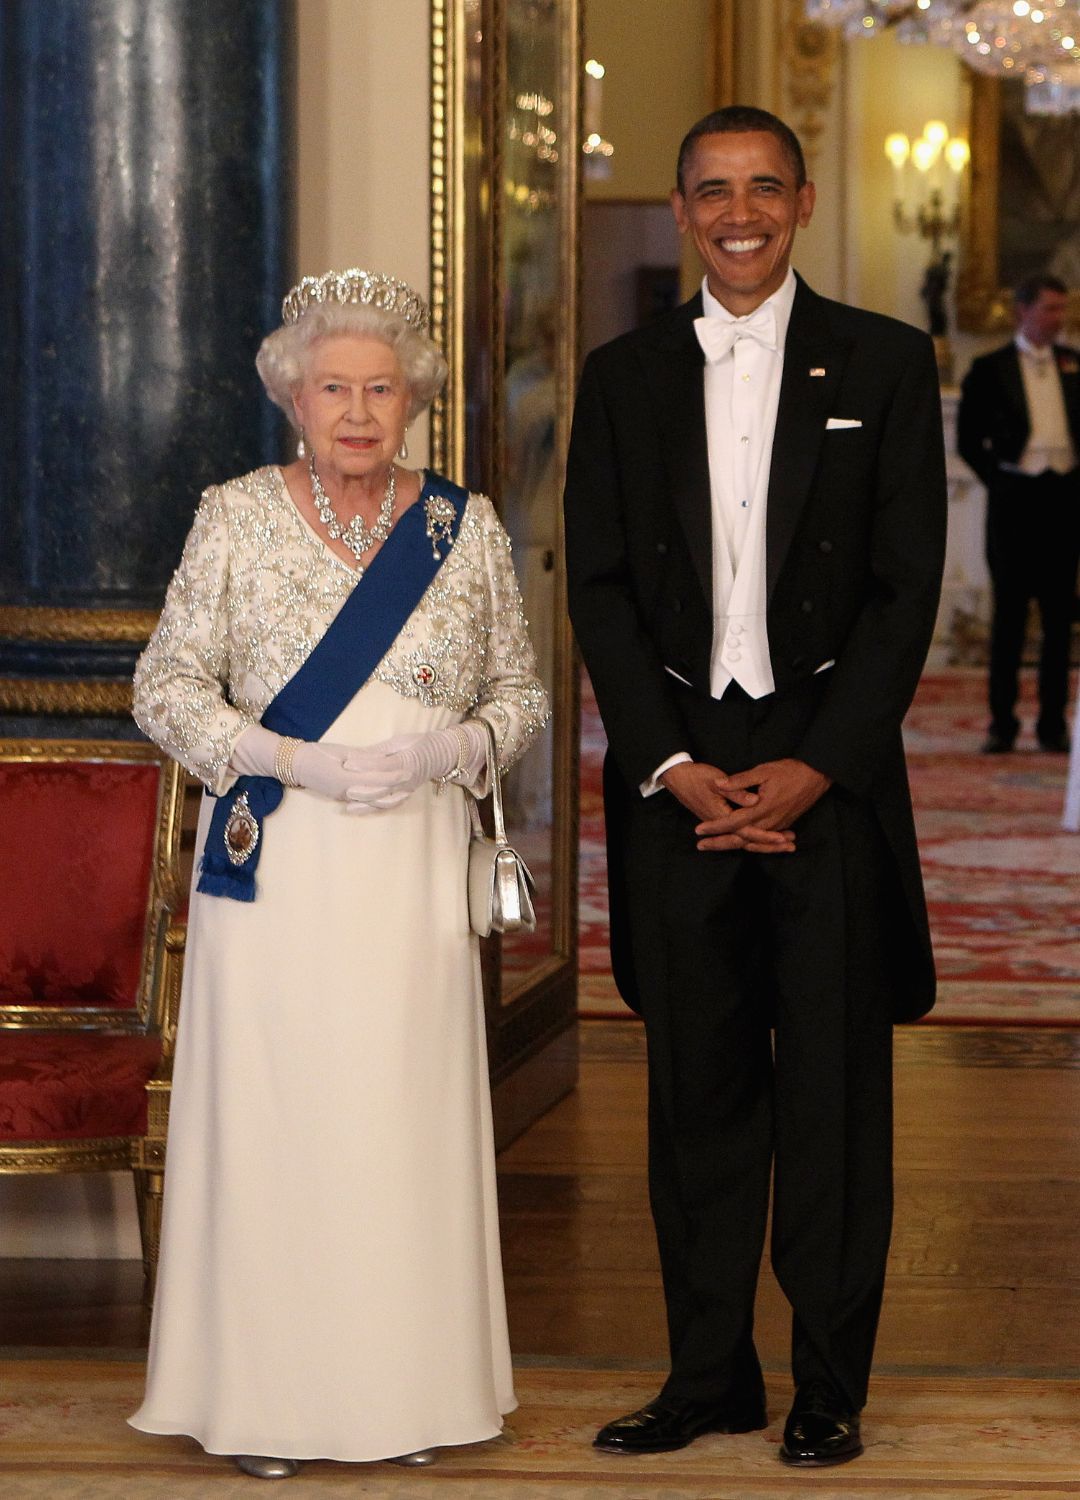 <p>                     In her long and impressive reign, Queen Elizabeth II met several American presidents, from President Harry Truman to President Joe Biden. She's pictured here meeting the 44th President of the United States, Barack Obama, whom she invited to a State Banquet in 2011 in Buckingham Palace. The Queen wore her finest jewels for the engagement, a mixture of pearls and diamonds along with the Grand Duchess Vladimir tiara.                   </p>